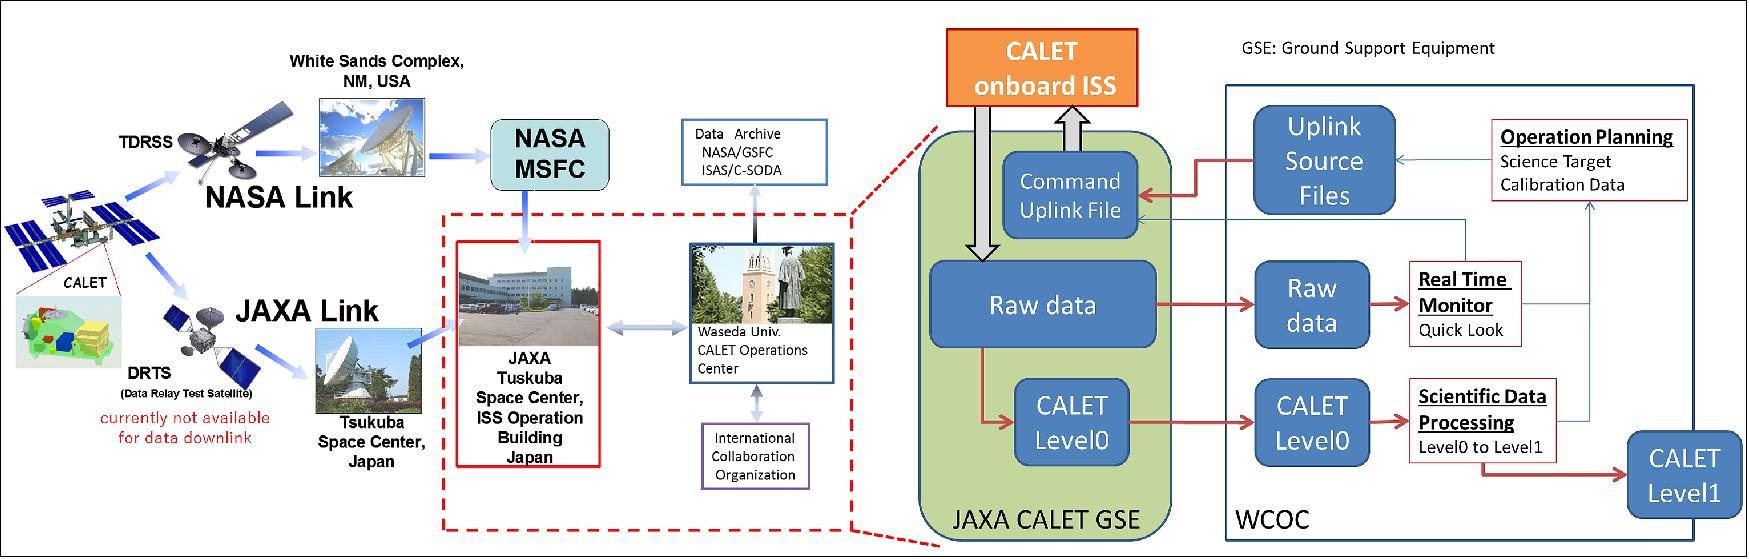 Figure 16: CALET data flow from orbit to ground. The dataflow of the CALET ground system is summarized on the right-hand side. Interfaces to JAXA-GSE are defined corresponding to each role of WCOC. JAXA-GSE has direct interfaces to the ISS and CALET (image credit: JAXA/NASA, ISS-CALET Team)